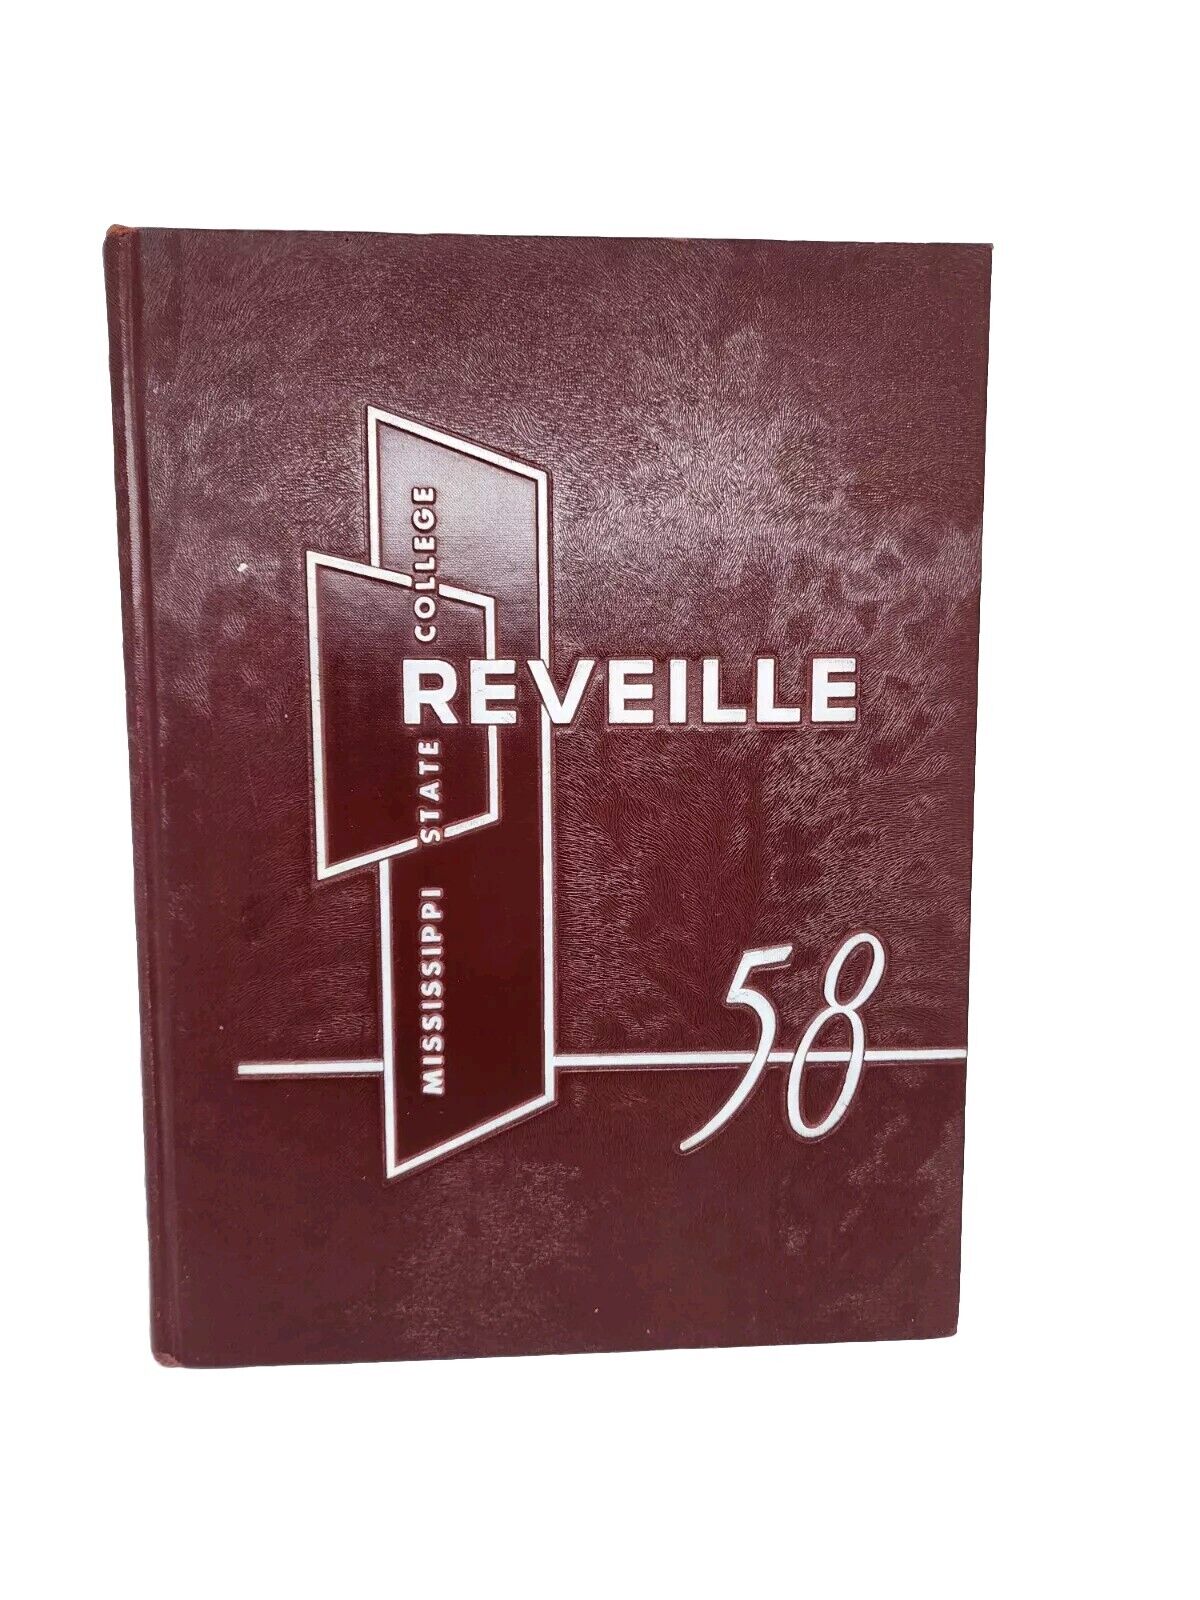 Mississippi State College 1958 The Reveille Yearbook.  Segregated Mississippi